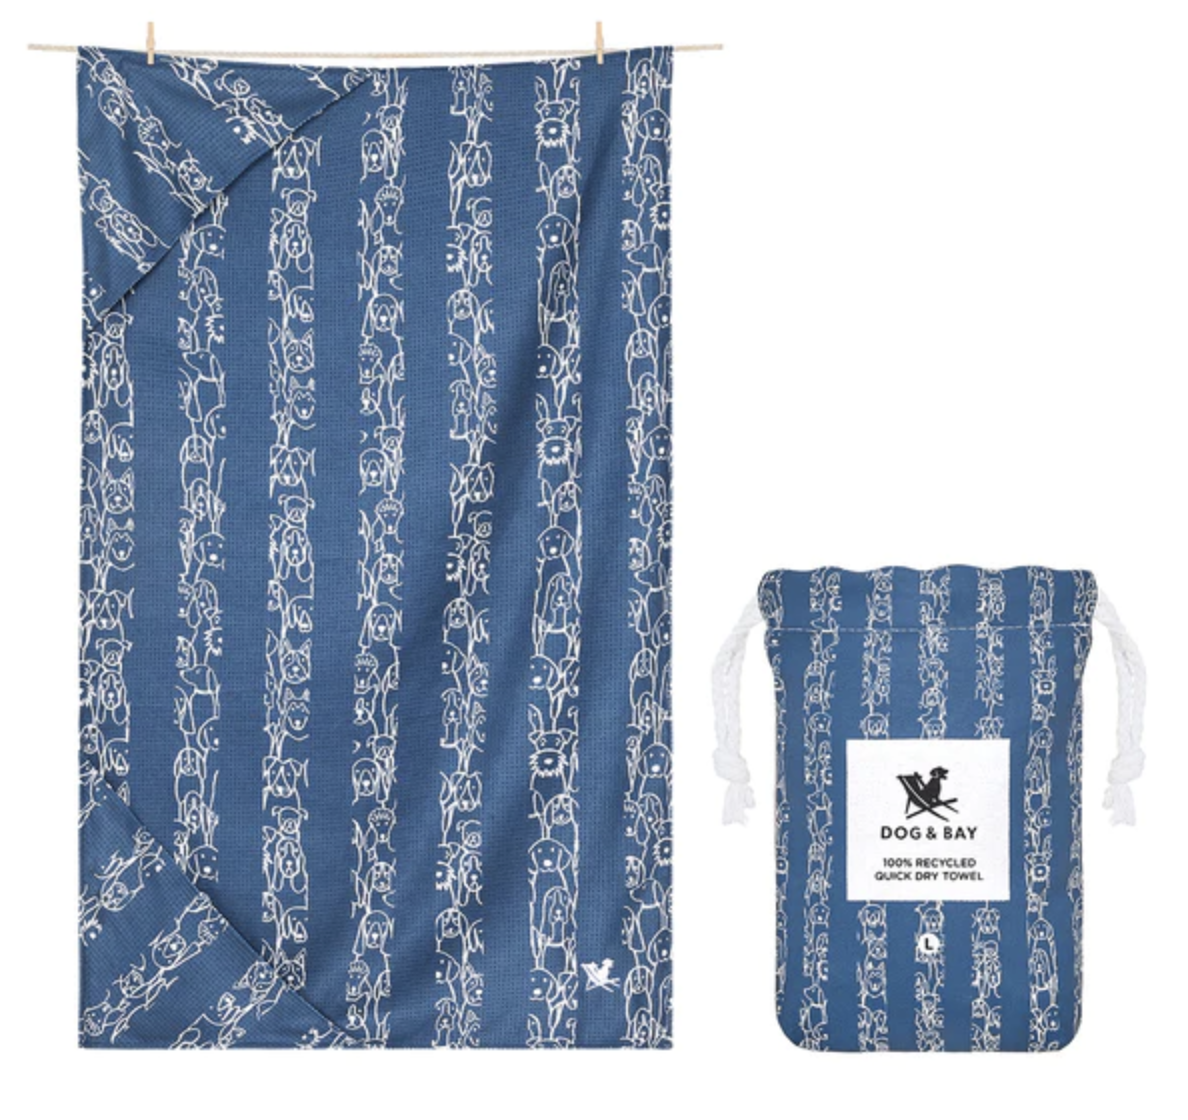 dock & bay Puppy Party Dog Towel